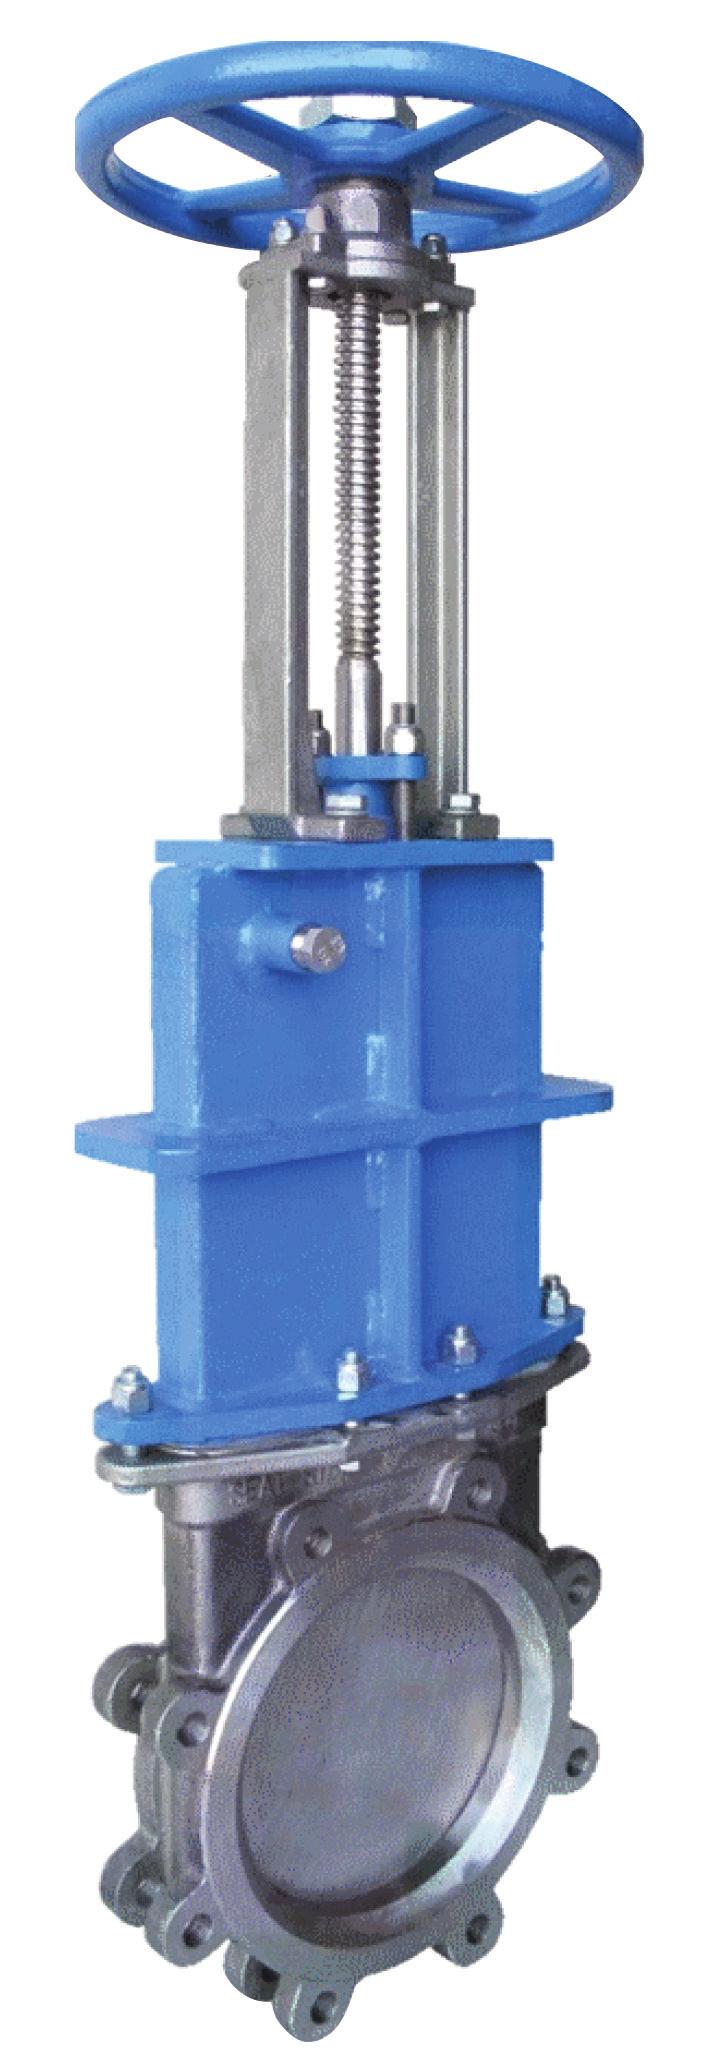 Figure 193 Bonneted Metal Seated Knife Gate Valve Bonneted knife gate valves are ideally suited to reduce fugitive emissions and packing leakage. Cast stainless steel body, gland and yoke.